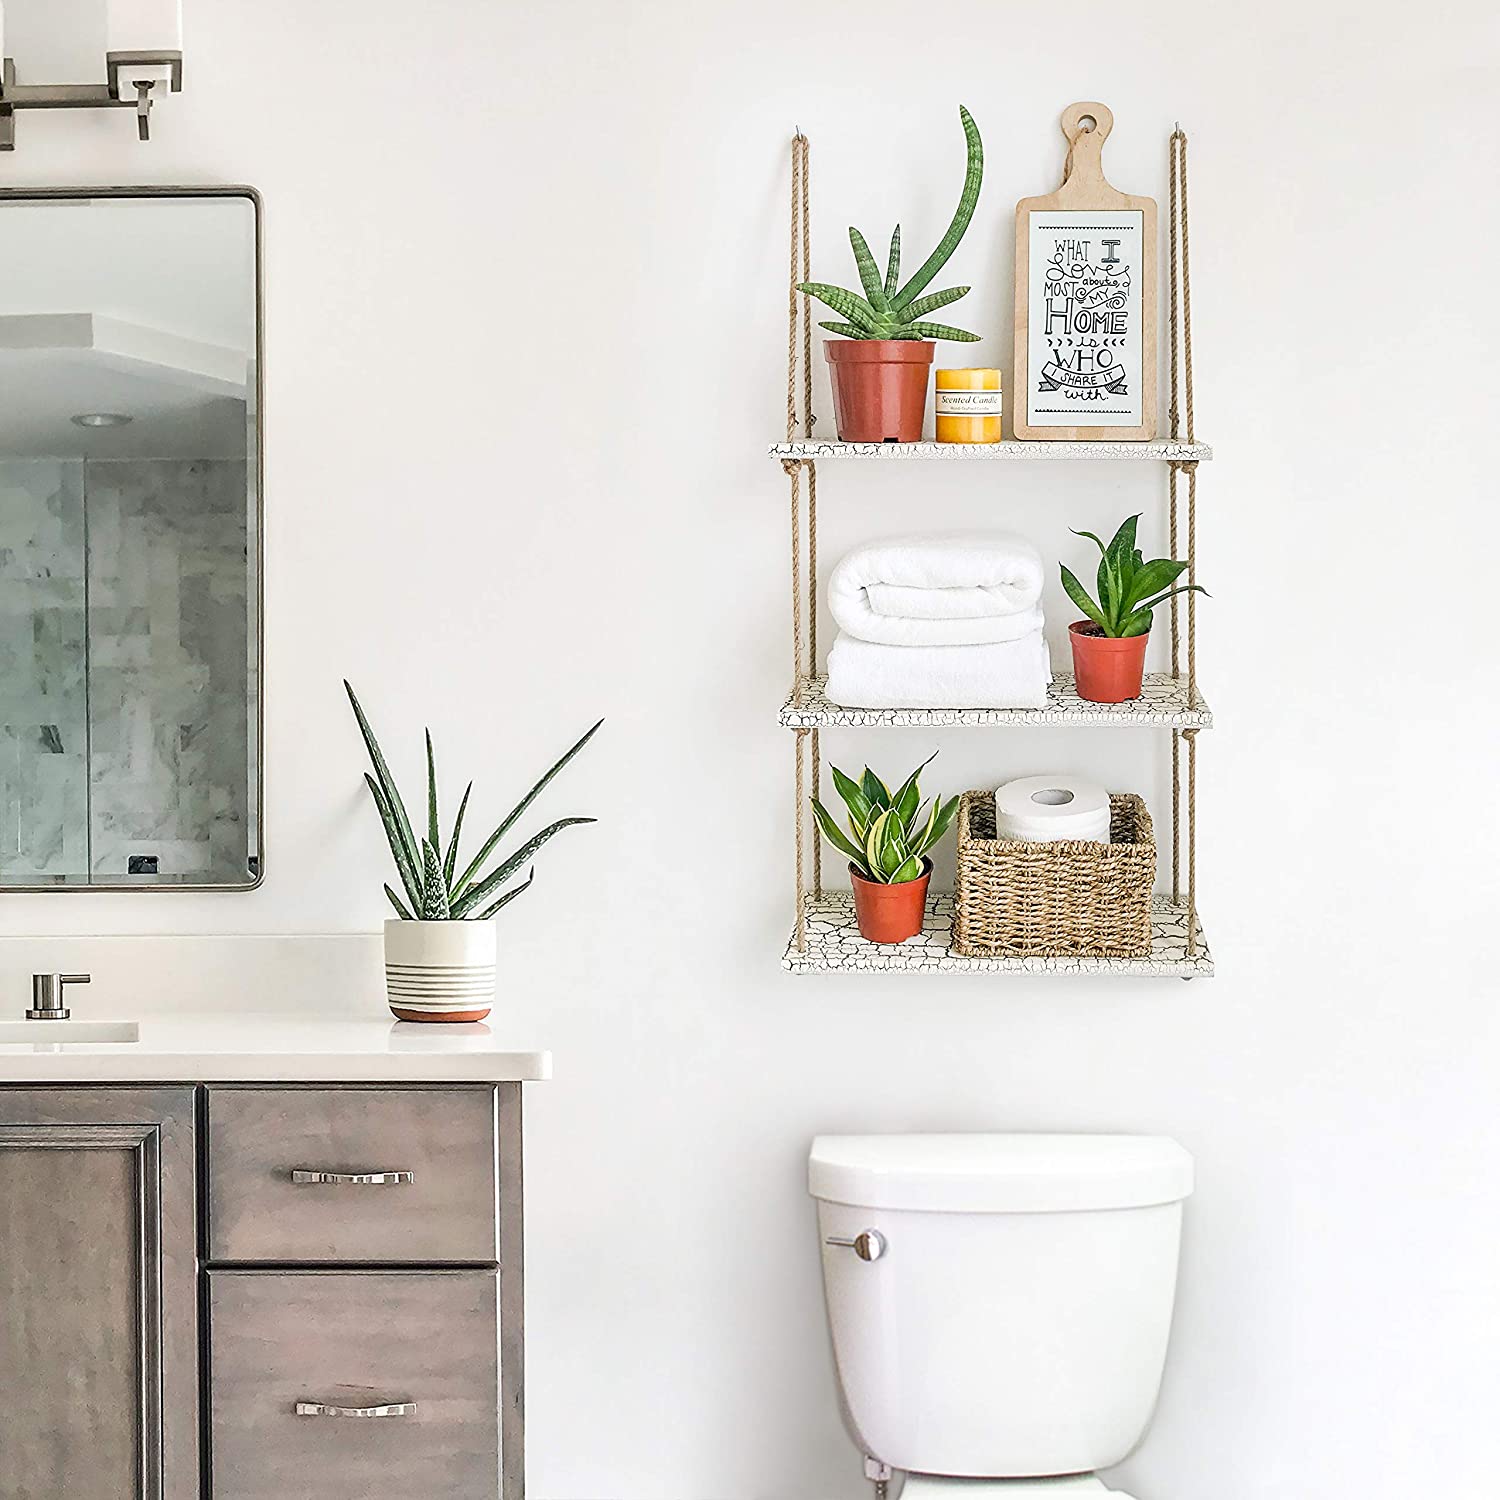 Hanging shelf with plants and towels above the toilet